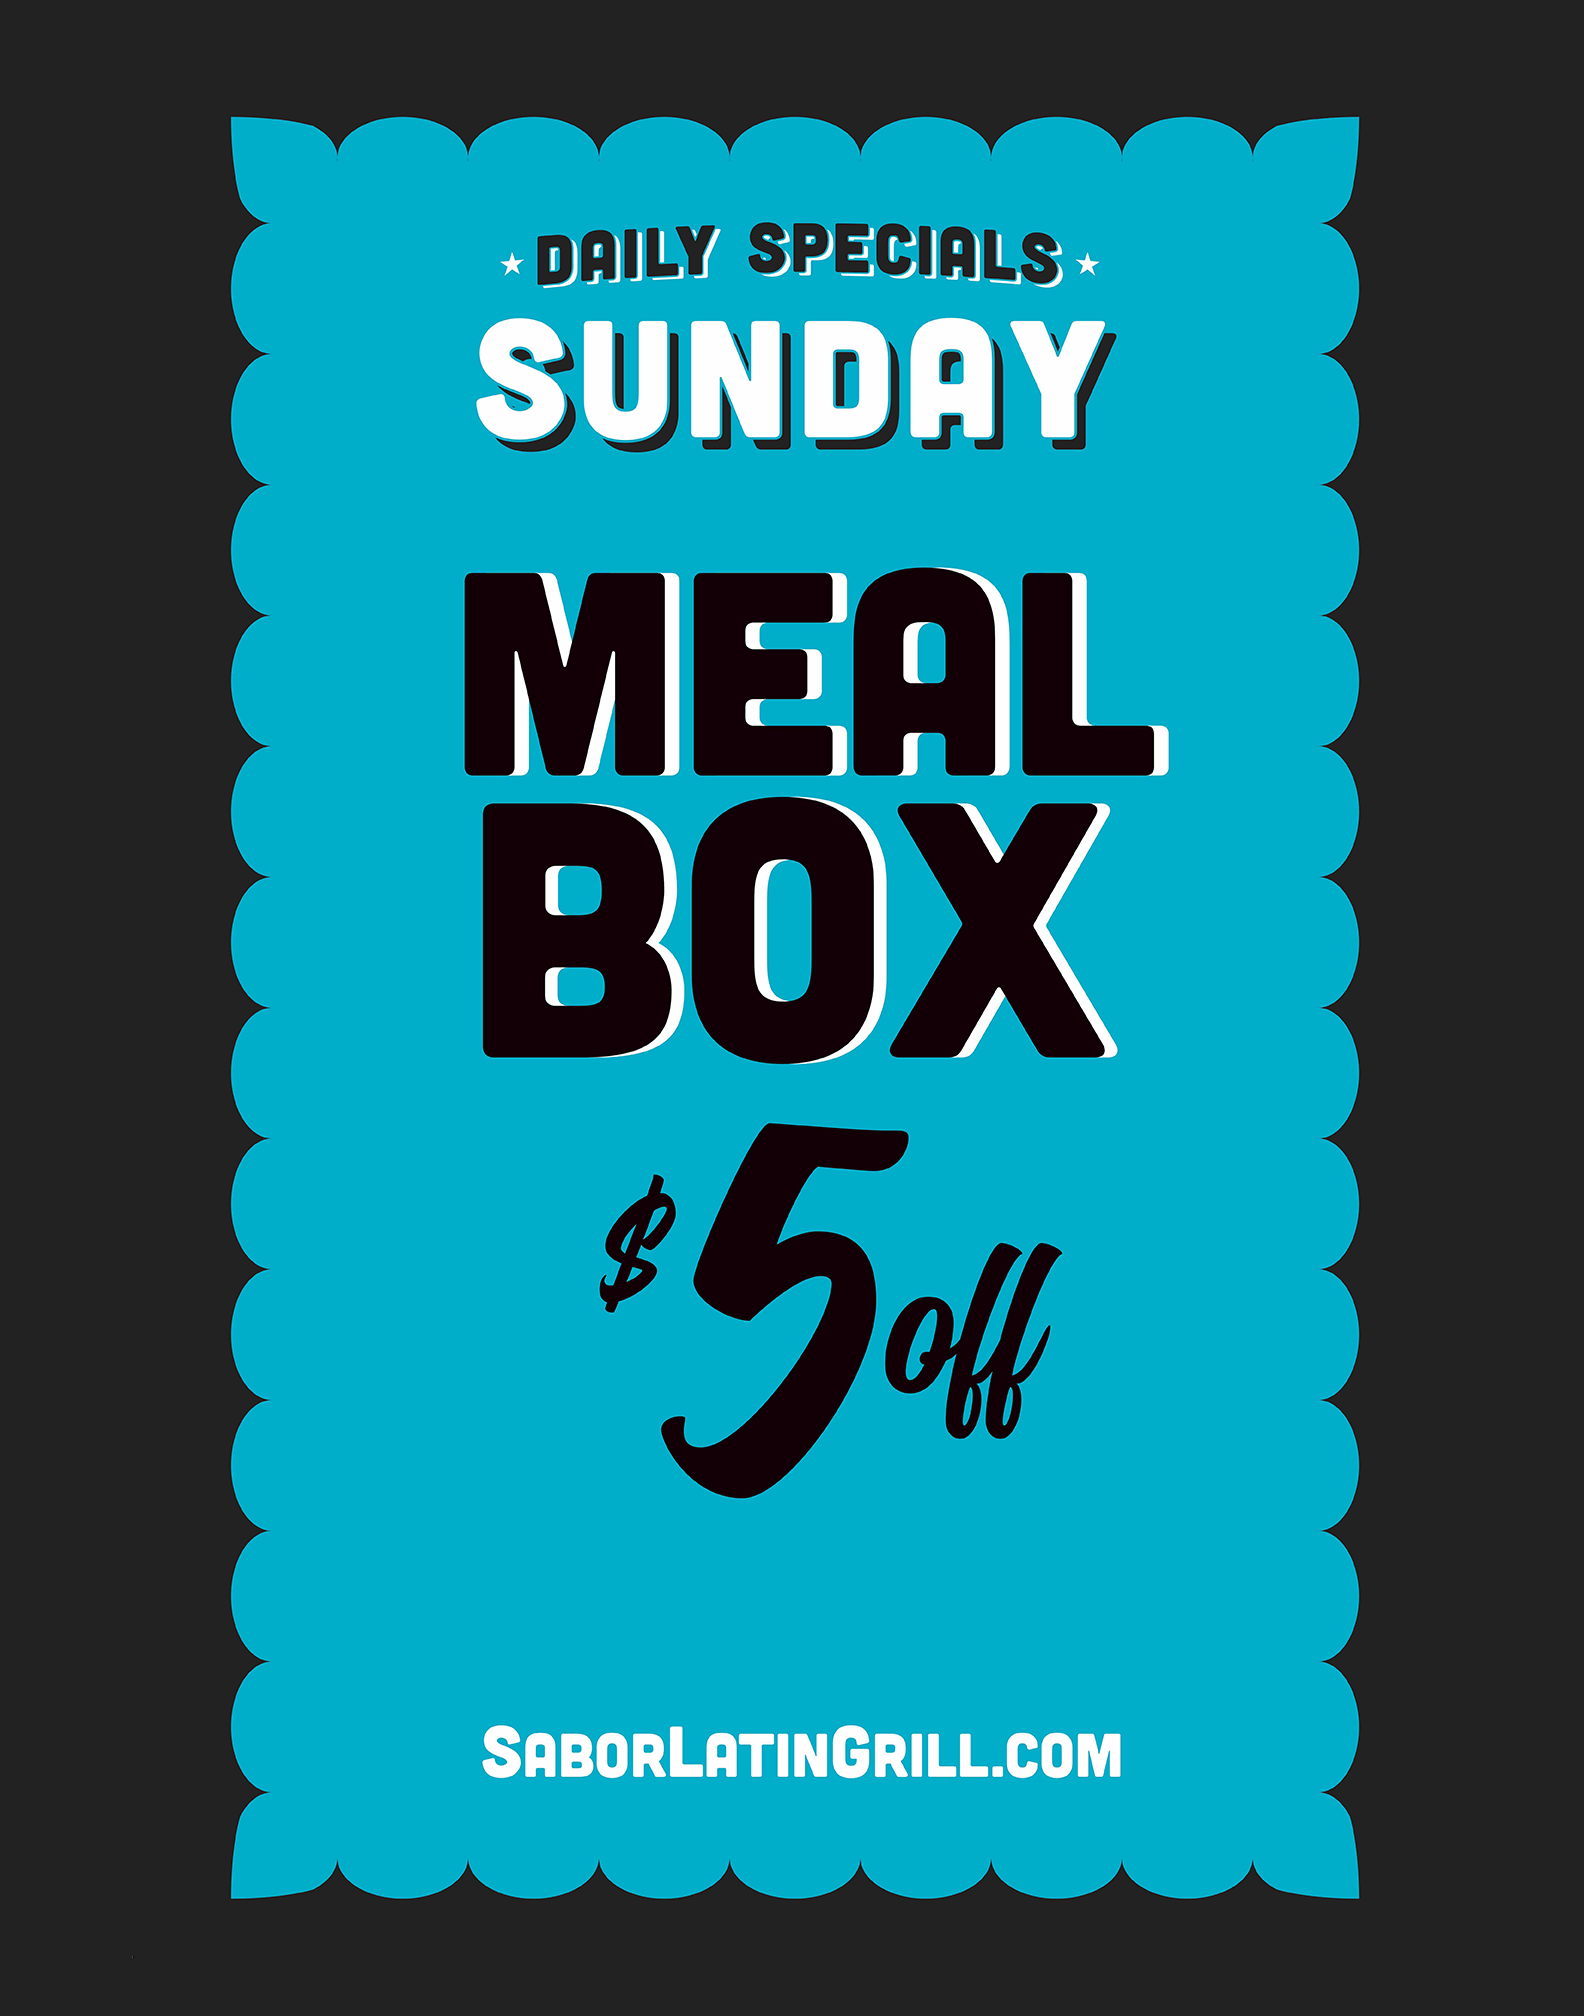 Sundays - $5 off Meal Boxes